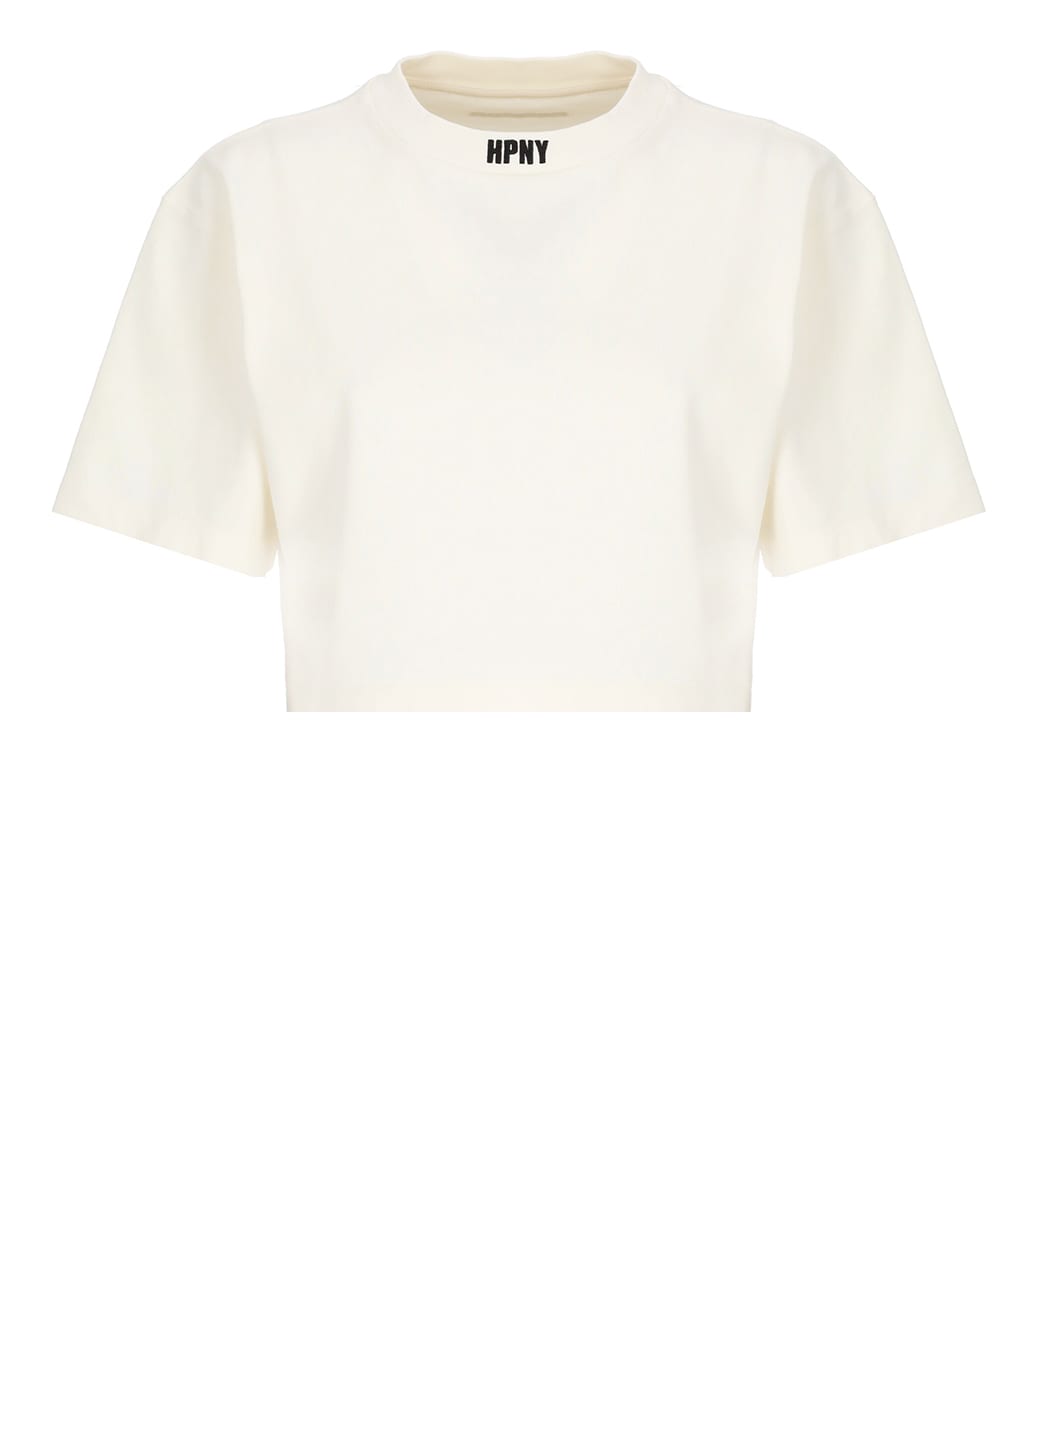 Hpny Embroidered Crop T-shirt